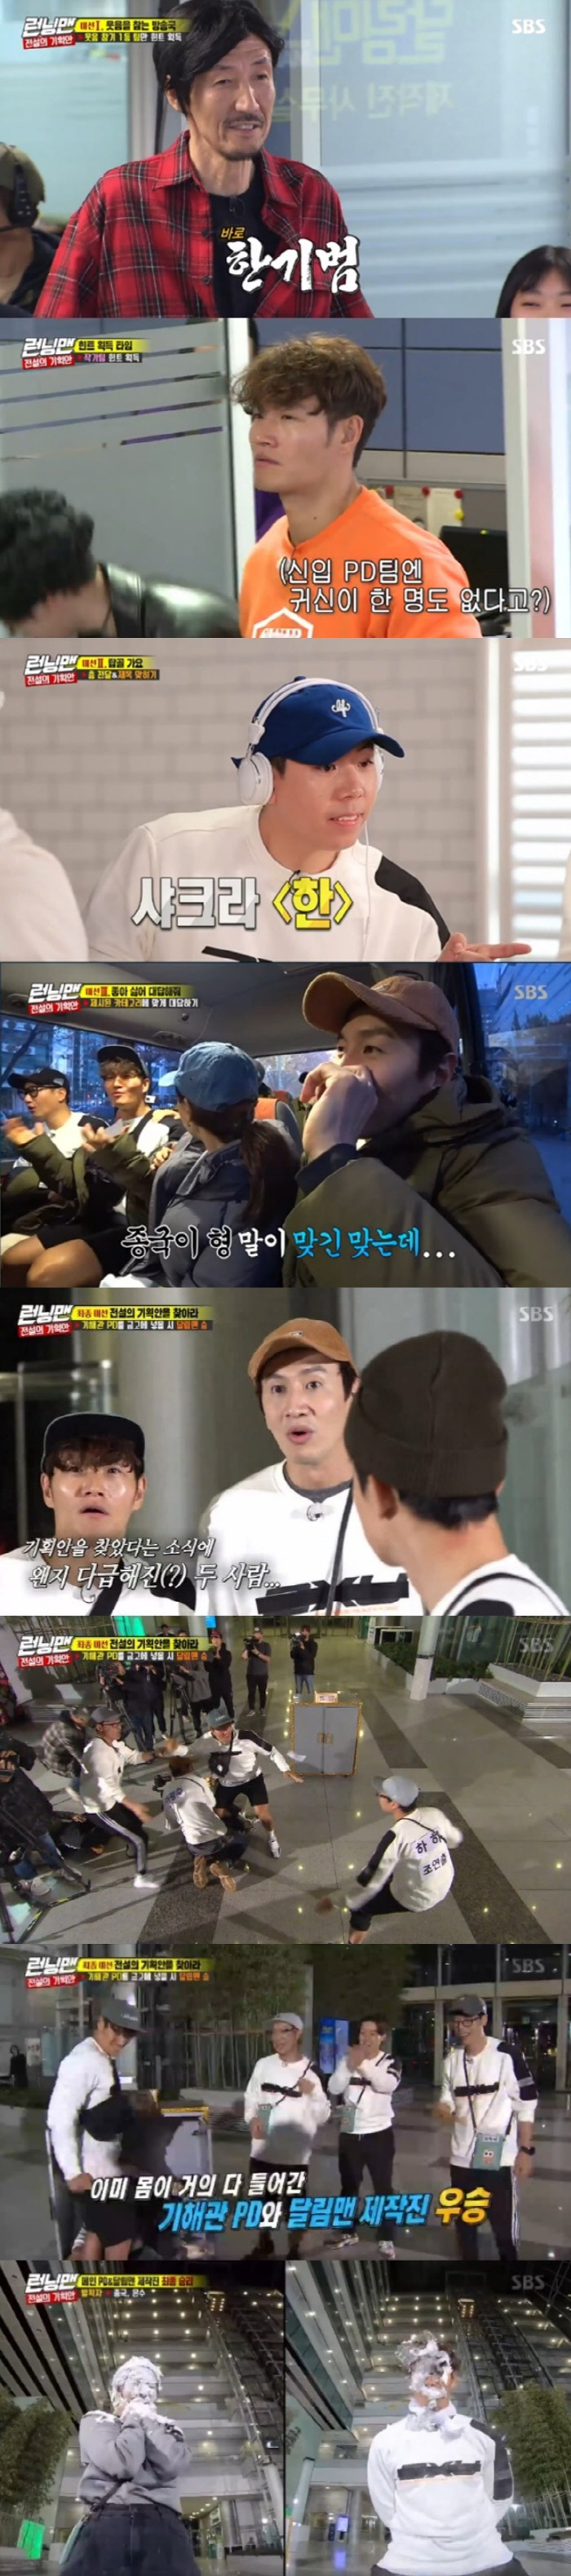 The Identity of SBS Running Man was Seo Eun-soo and Kim Jong-kook.According to Nielsen Korea, a TV viewer rating research institute, Running Man, which was broadcast on the 24th (Sun), ranked first in entertainment in the same time zone with 4% of 2049 target TV viewer ratings (based on the second part of the Seoul metropolitan area).The average TV viewer ratings were 5.7% in the first part and 7.5% in the second part, while the highest TV viewer ratings per minute soared to 9.2%.The broadcast was decorated with the Legendary Plan Race, which followed last week, and the members struggle to find Kolocki and the angle was drawn.With Godseven camp, actor Seo Eun-soo, Choi Ri and comedian Hur Kyung-hwan on the show as guests, the members were divided into PD, writer and new PD team of the Running Man program to challenge their first mission, a broadcasting station looking for laughter.Members burst into laughter bombings from the melon navel tool uncle to Yondu general manager, and One more example, which appeared in Laughing Resistance Race, appeared as a wedge-stitching three-member girl group Hans Band and carried a big laughing bomb.The writer team was able to get the hint by laughing the least, and the writer team found that the new PD team had no collocide with Kollok.The second mission, Topgol Song, was a mission to hit the hit choreography of the hit song, but the members failed to get hints due to successive failures.The third round was played out against the background of the station, and Koloki and the other members were immersed in identifying hints everywhere, but Koloki and the other members had to be eliminated.Starting with Chois elimination, which had been suspected by everyone, Jeon So-min, Song Ji-hyo, and Yang Se-chan were in-N-Out Burger, and Yoo Jae-Suk put Collock Seo Eun-soo in-N-Out Burger based on the hint that the assistant director is a woman.Now, with only the Identity of the Pick left, Kim Jong-kook and Lee Kwang-soo clashed.Lee Kwang-soo found out that the main PD had to enter the safe and succeeded in the final mission.Kim Jong-kook and Seo Eun-soo were penalized for fresh cream as they ended with the victory of the Runman crew.SBS Running Man is broadcast every Sunday at 5 pm.